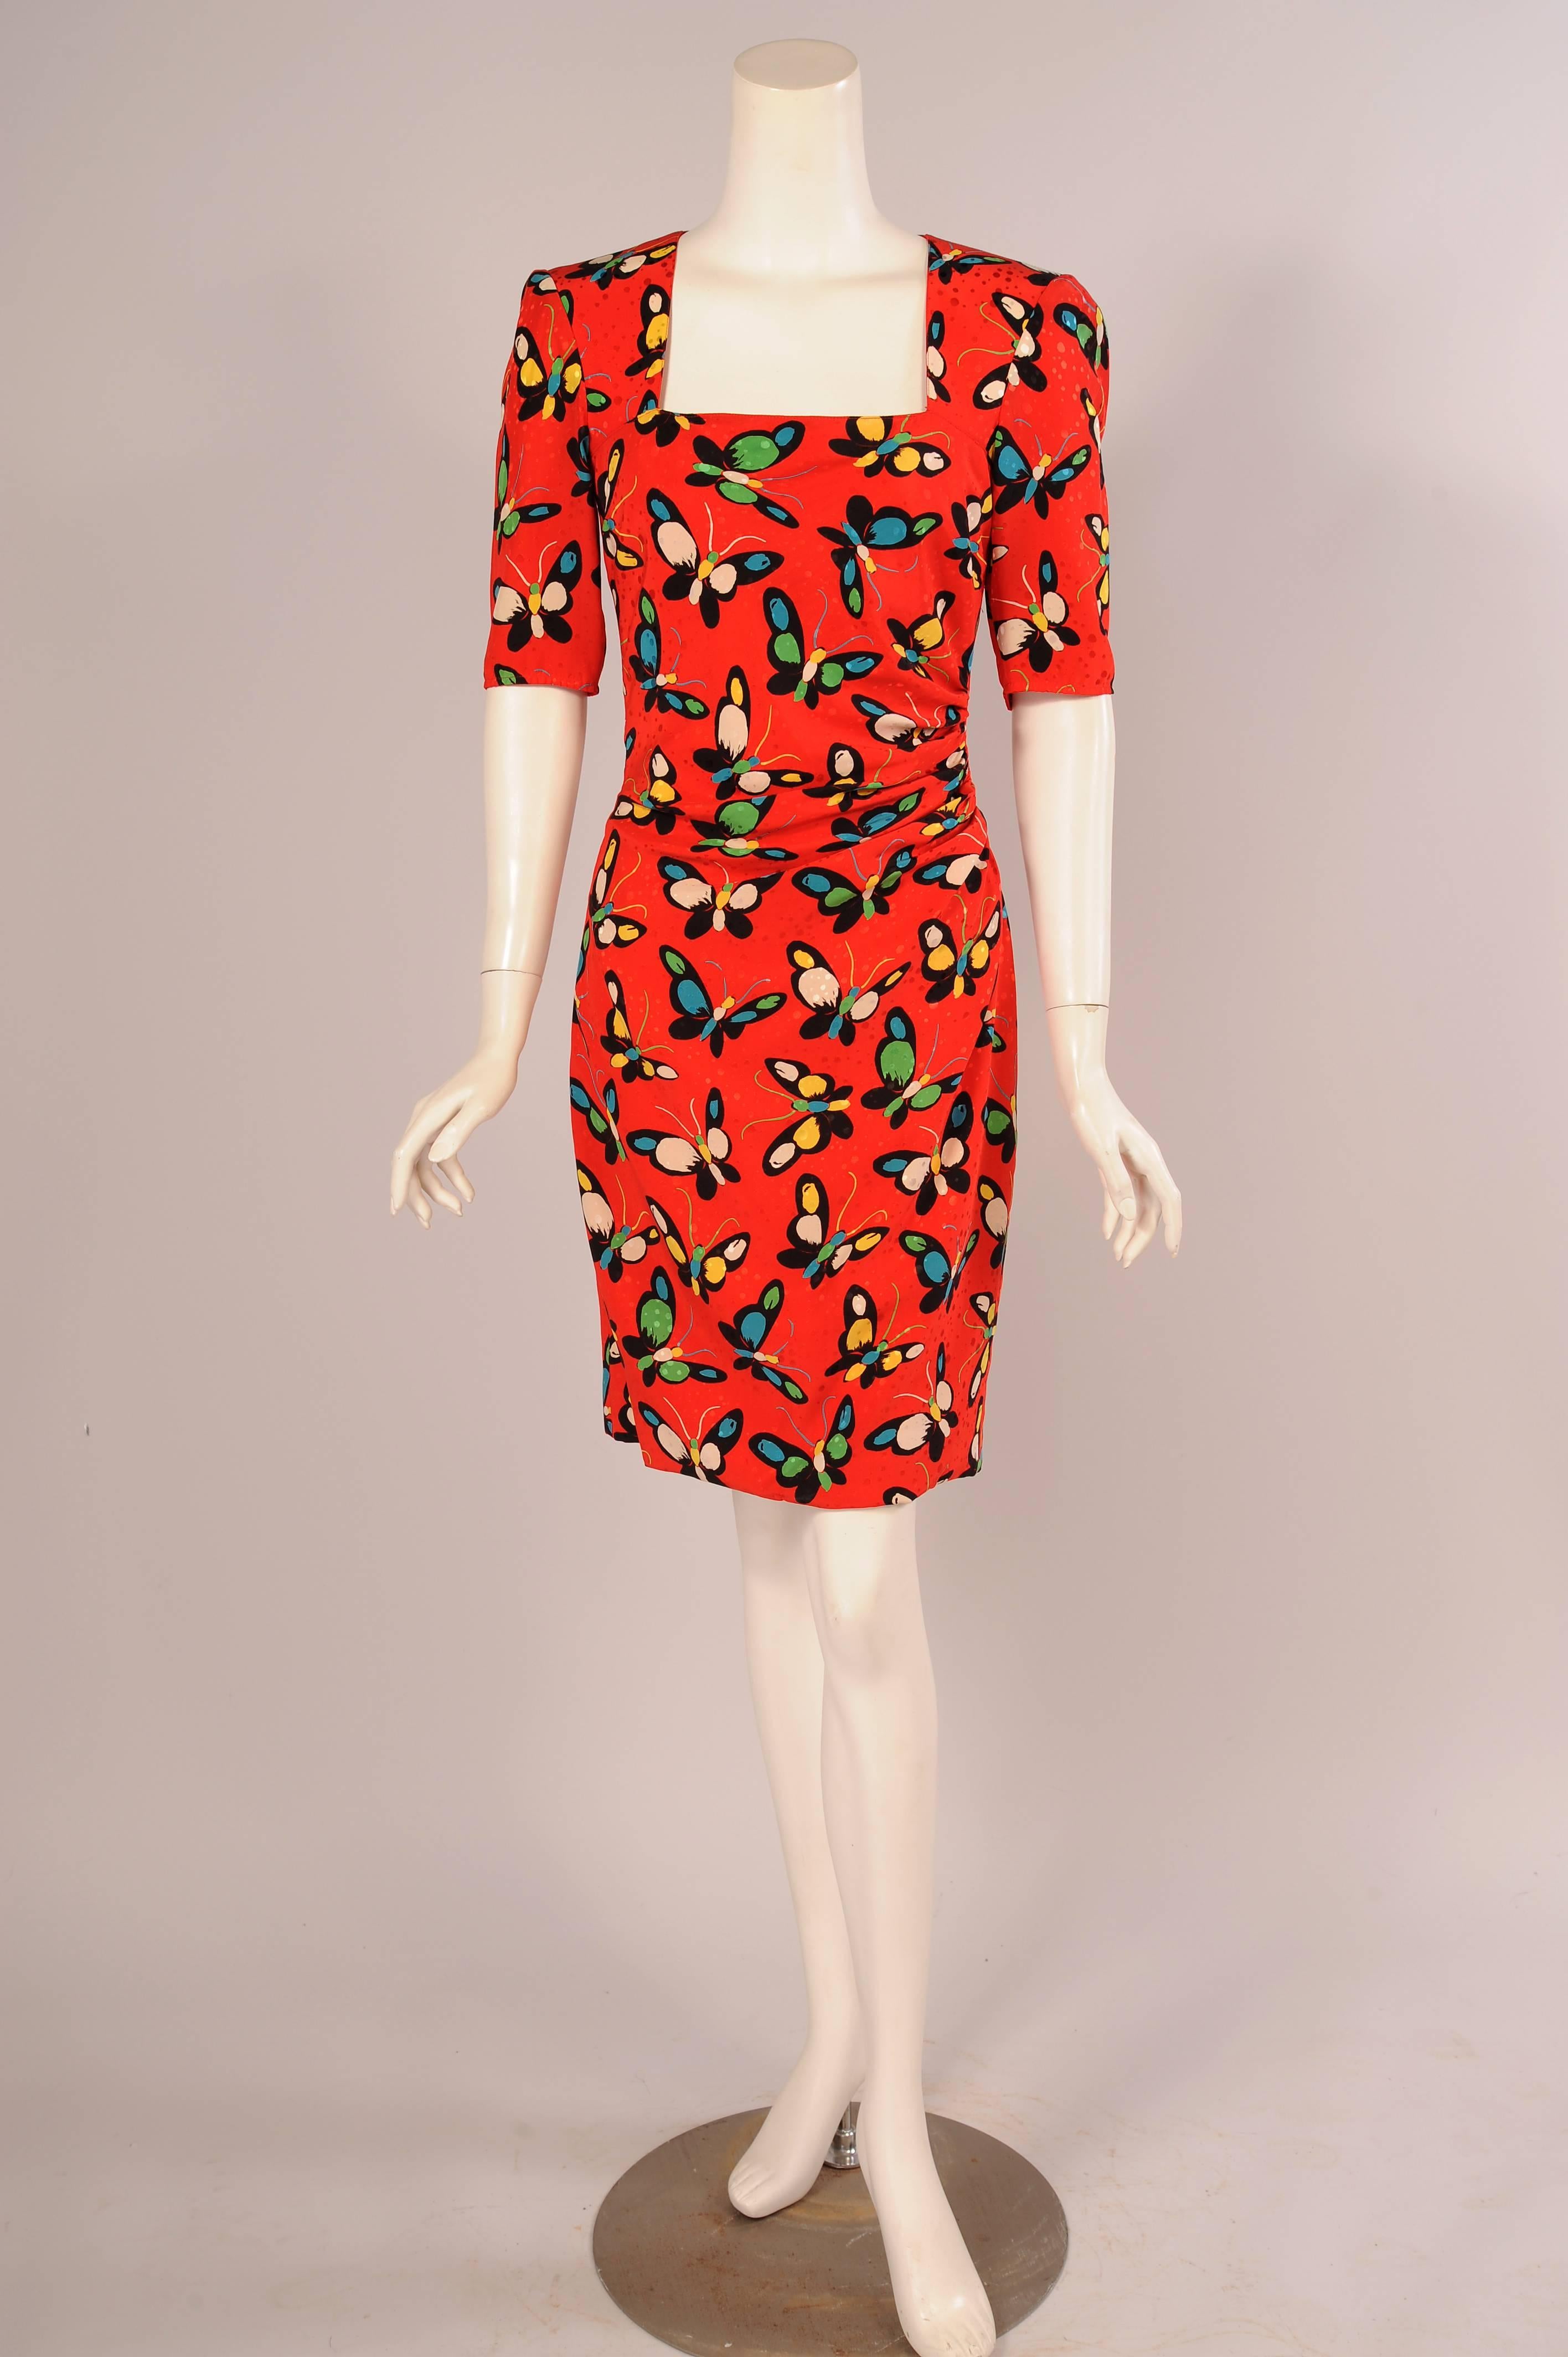 A cheerful and colorful butterfly print is combined with a woven dot pattern on this bright red dress from Ungaro Parallele. The dress has the signature sexy drape that Ungaro is known for with a square cut neckline and short sleeves. It has a